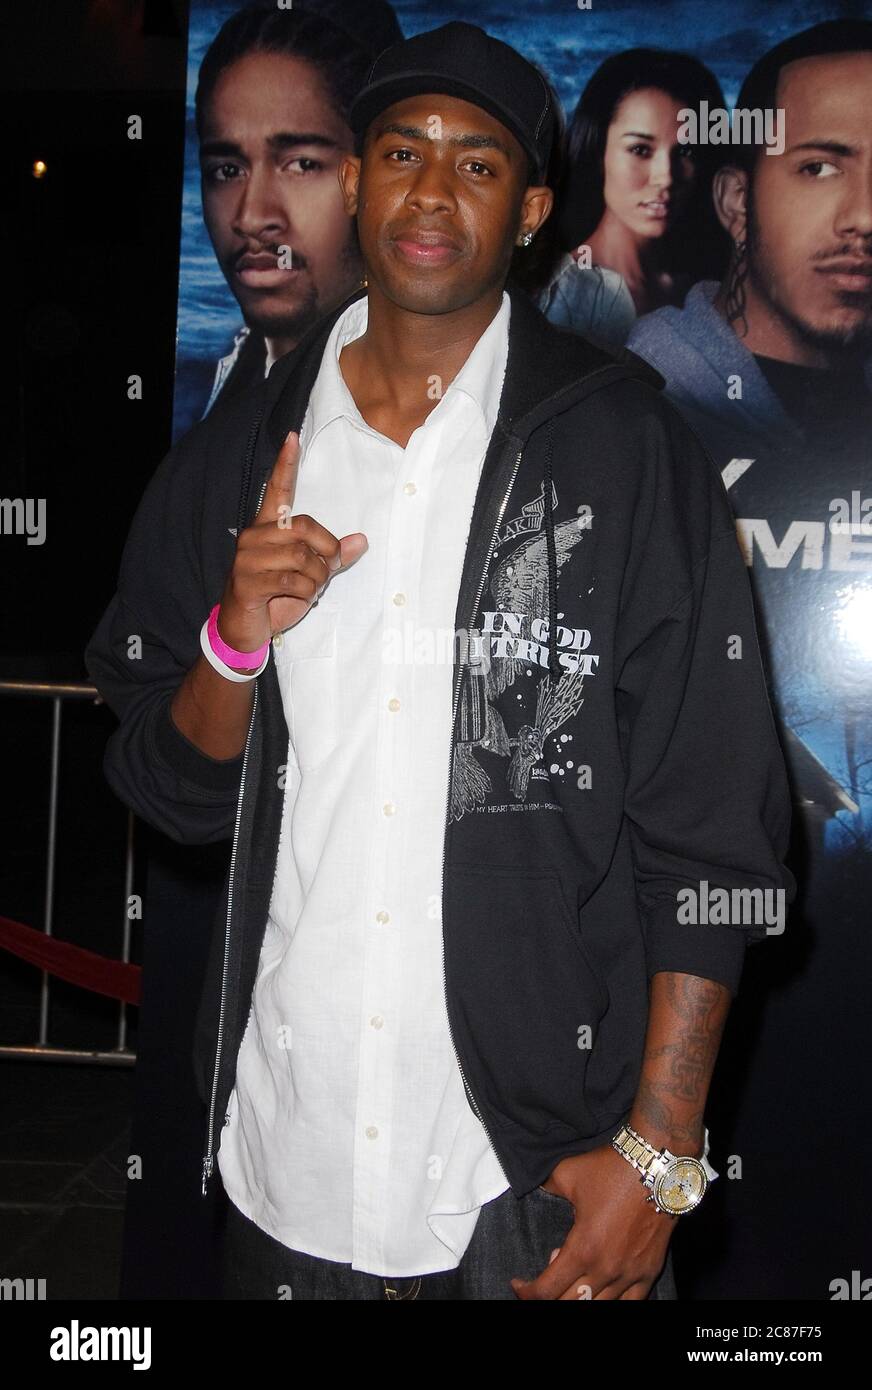 Silkk The Shocker at the Premiere of 'Somebody Help Me' held at the Grauman's Chinese Theater in Hollywood, CA. The event took place on Thursday, October25, 2007. Photo by: SBM / PictureLux- File Reference # 34006-9772SBMPLX Stock Photo